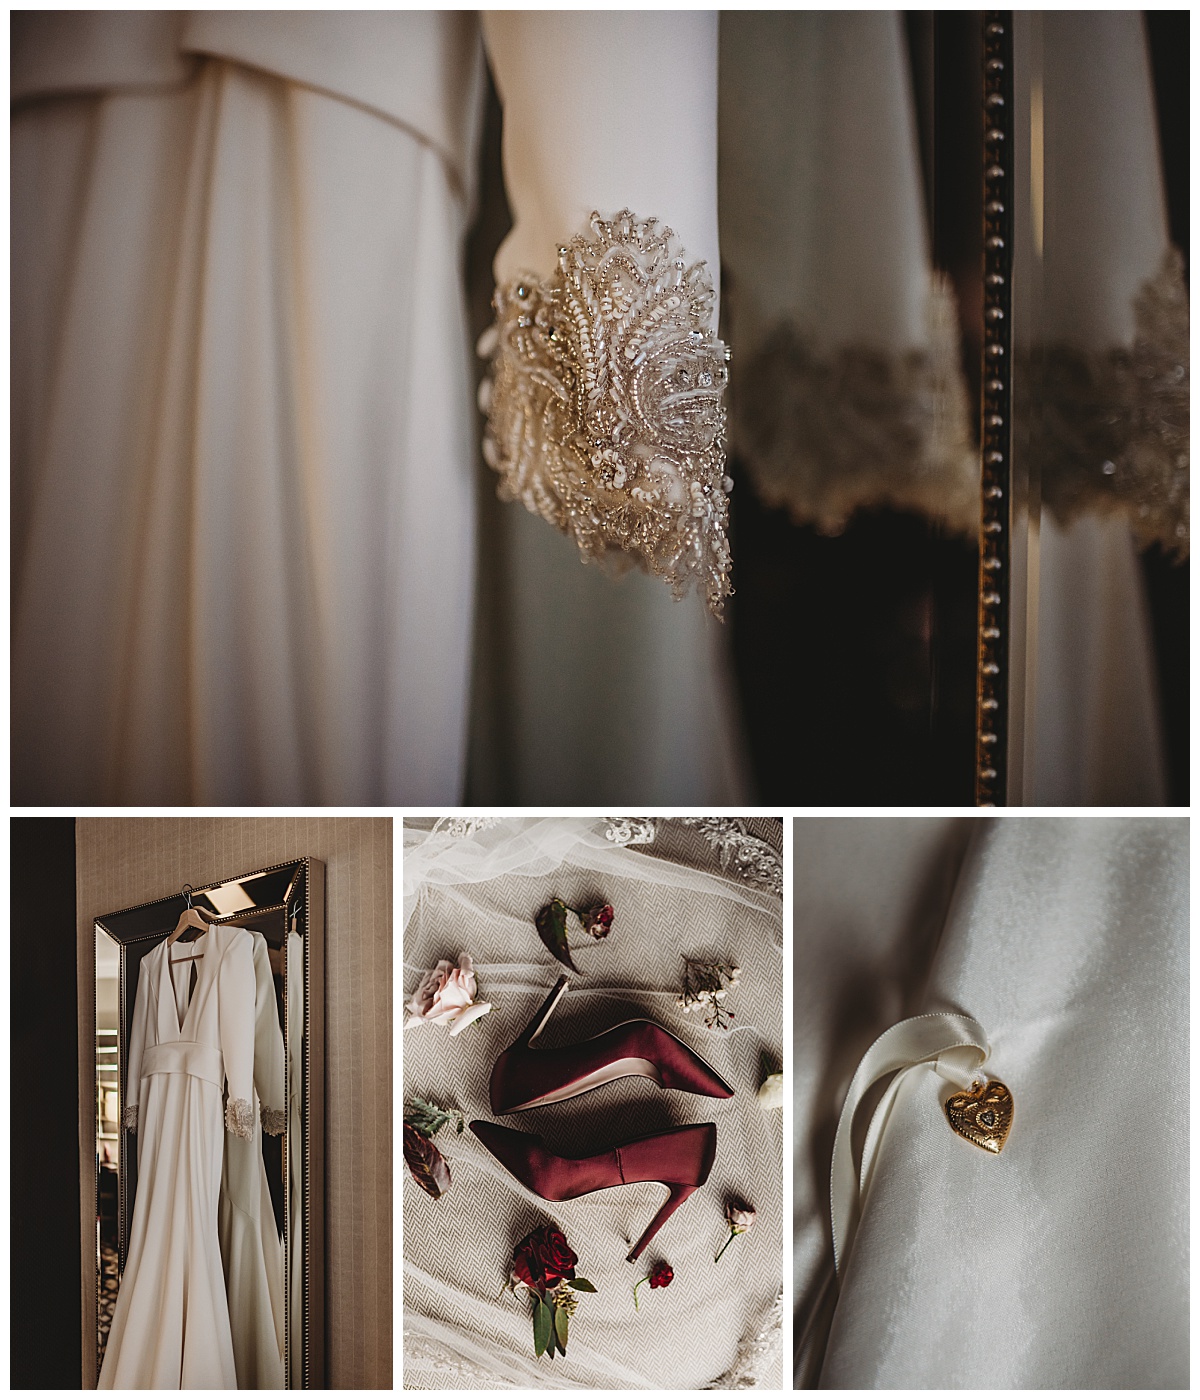 Wedding details for a moody winter wedding in Baltimore by Brittany Dunbar Photography, a Baltimore Wedding Photographer.